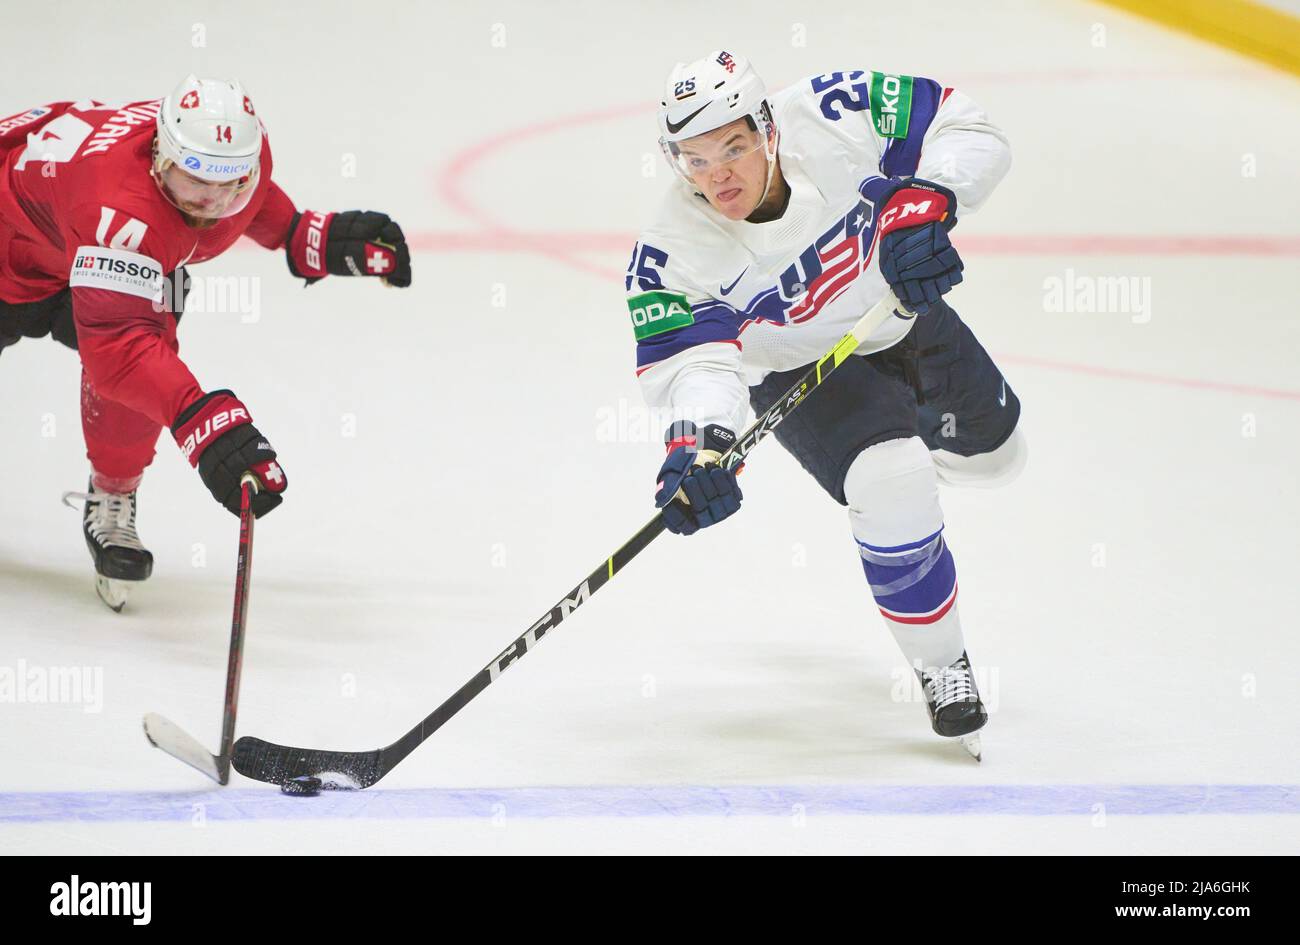 Karson Kuhlman USA Nr. 25 compete, fight for the puck against, Dean Kukan, SUI 14  in the match SWITZERLAND - UNITED STATES 0-3 IIHF ICE HOCKEY WORLD CHAMPIONSHIP Quarter final  in Helsinki, Finland, May 26, 2022,  Season 2021/2022 © Peter Schatz / Alamy Live News Stock Photo